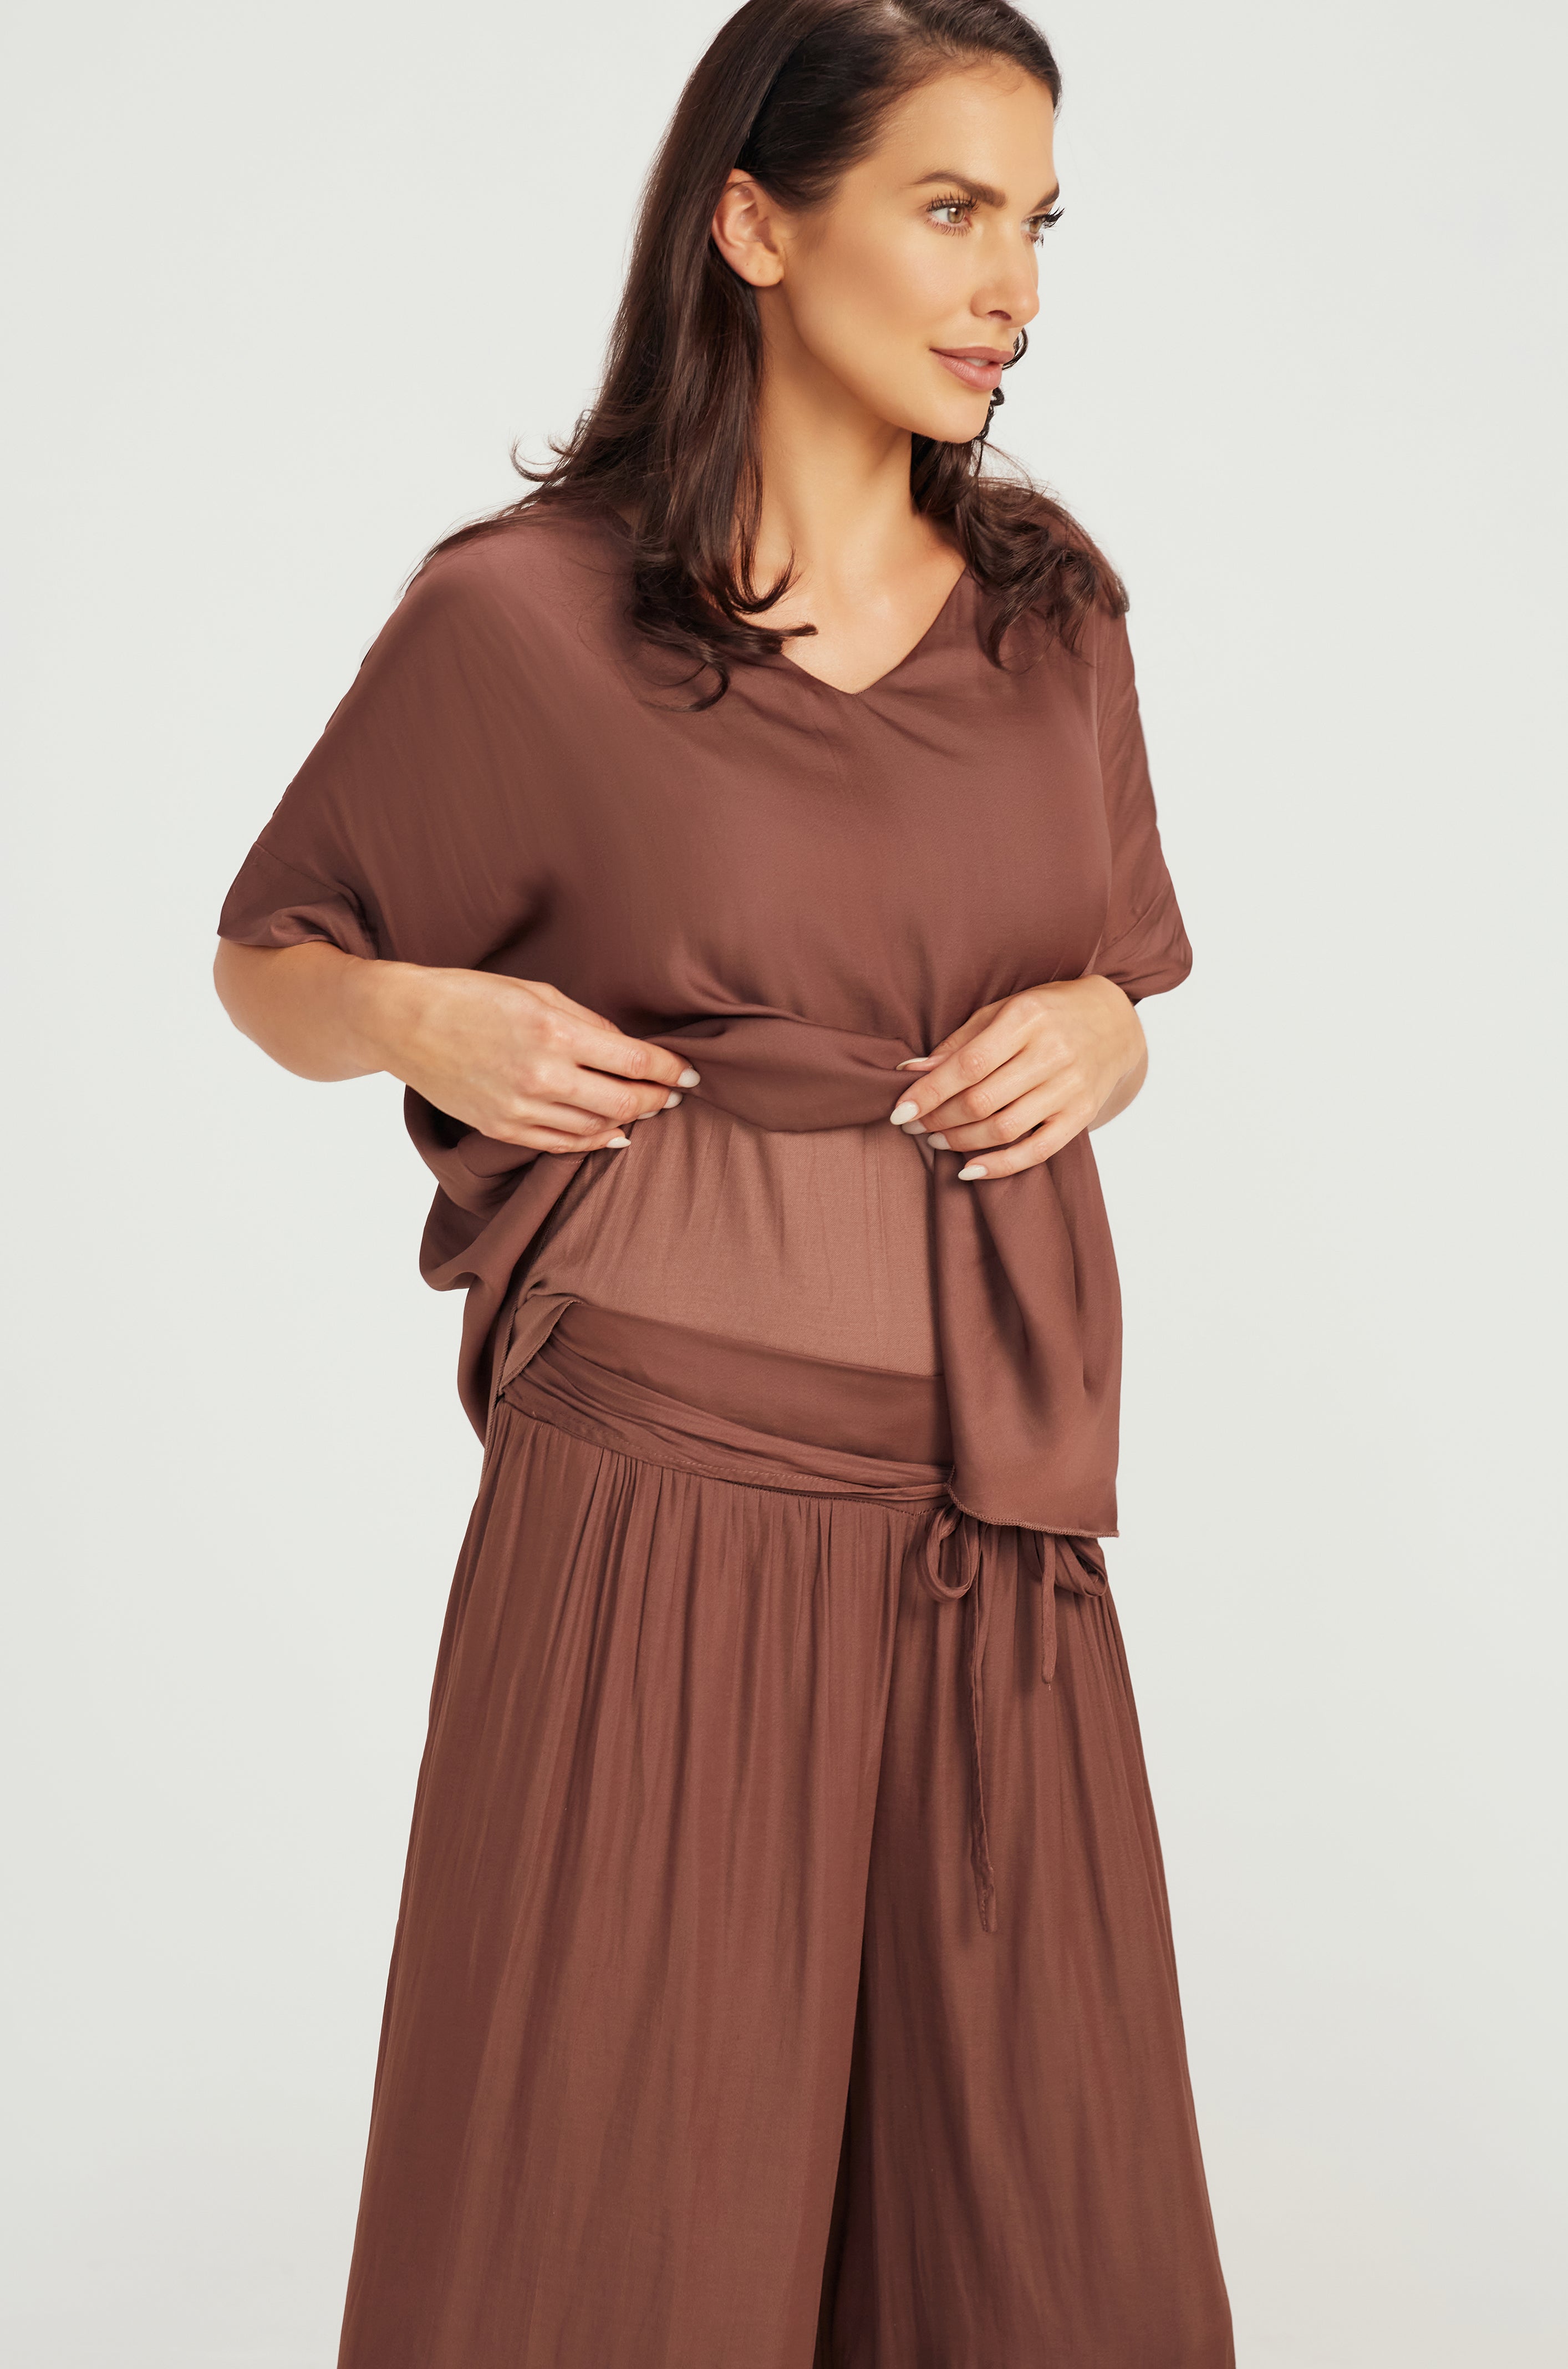 THE STAPLE TOP -V NECK  / CHOCOLATE PLUM / MATERNITY / PRE ORDER ONLY - Available Mid MAY